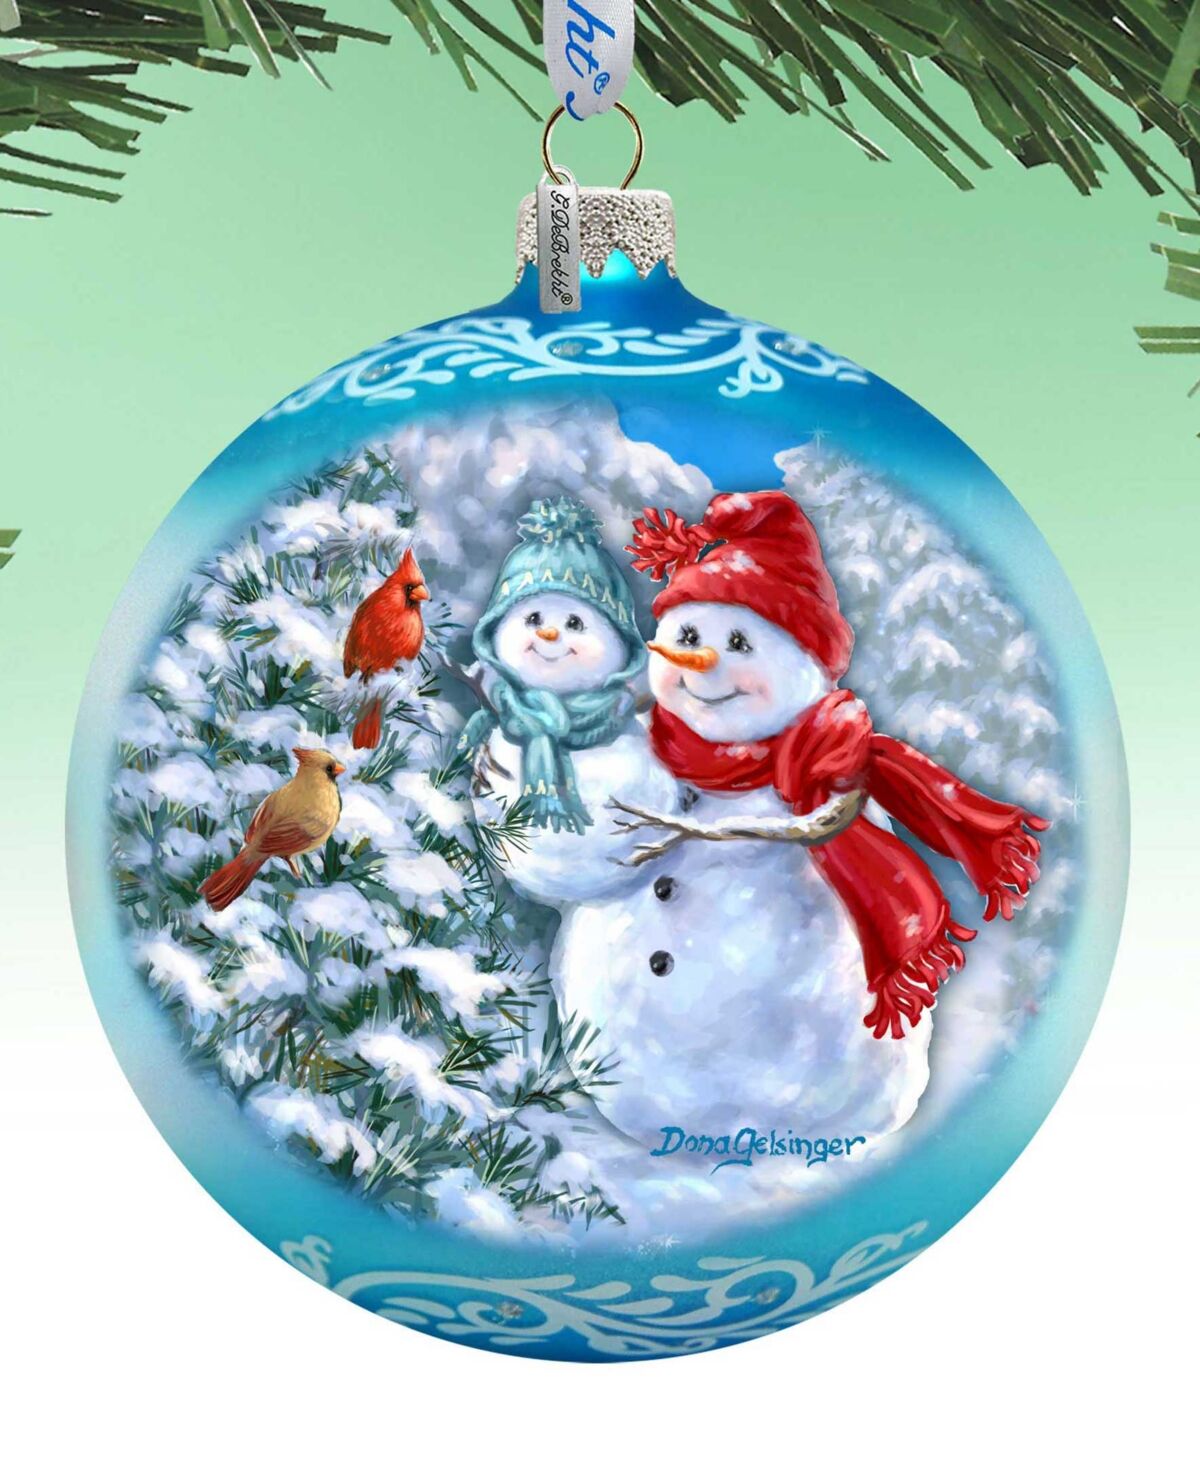 Designocracy Baby Snowman's First Winter Lg Holiday Collectible Ornaments D. Gelsinger - Multi Color